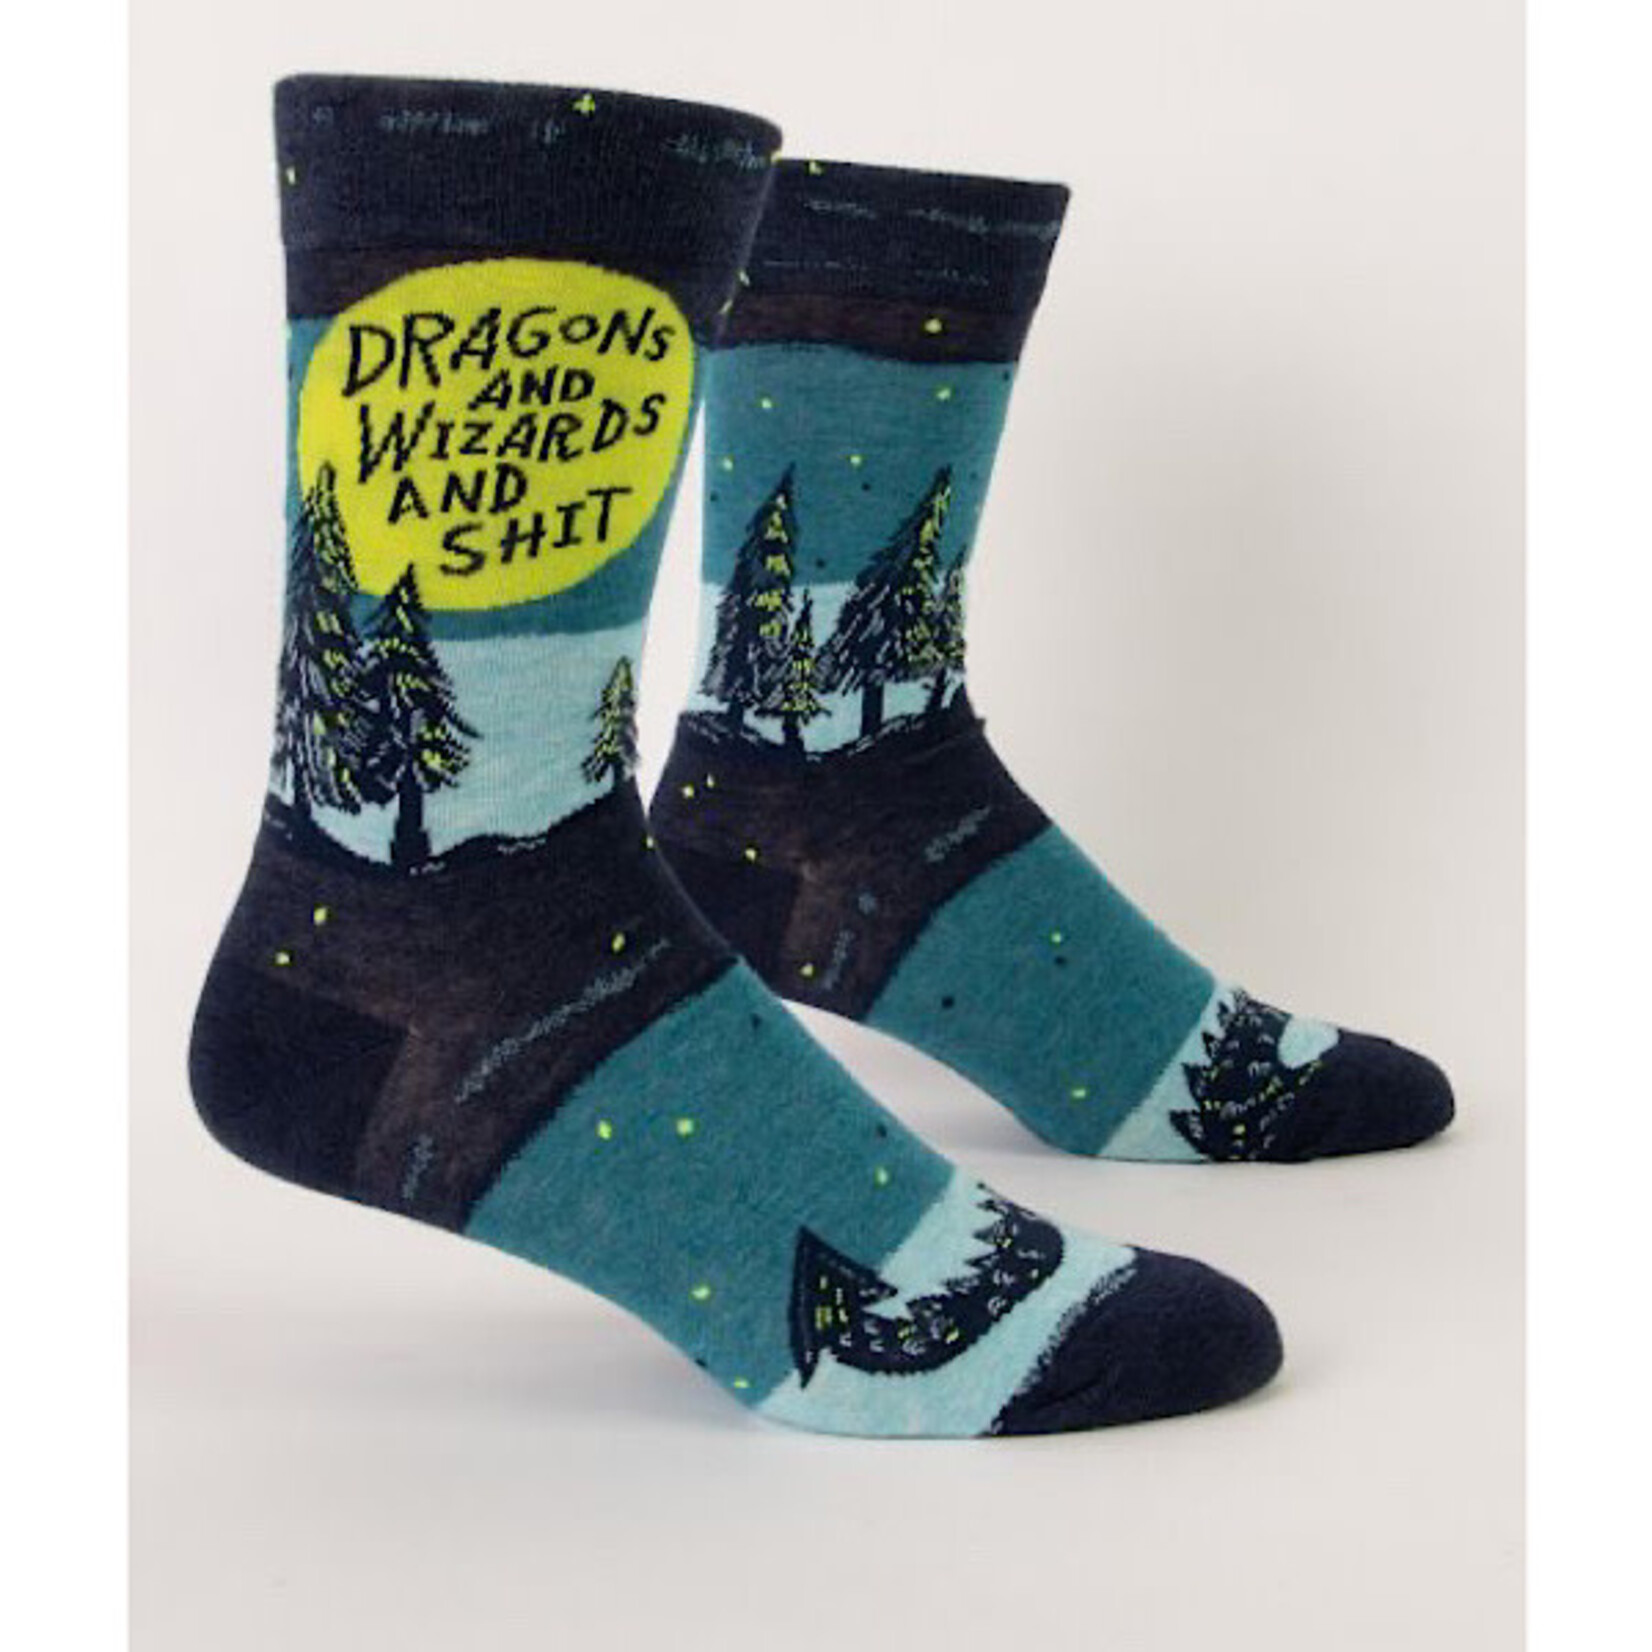 Socks (Mens) - Dragons And Wizards And Shit